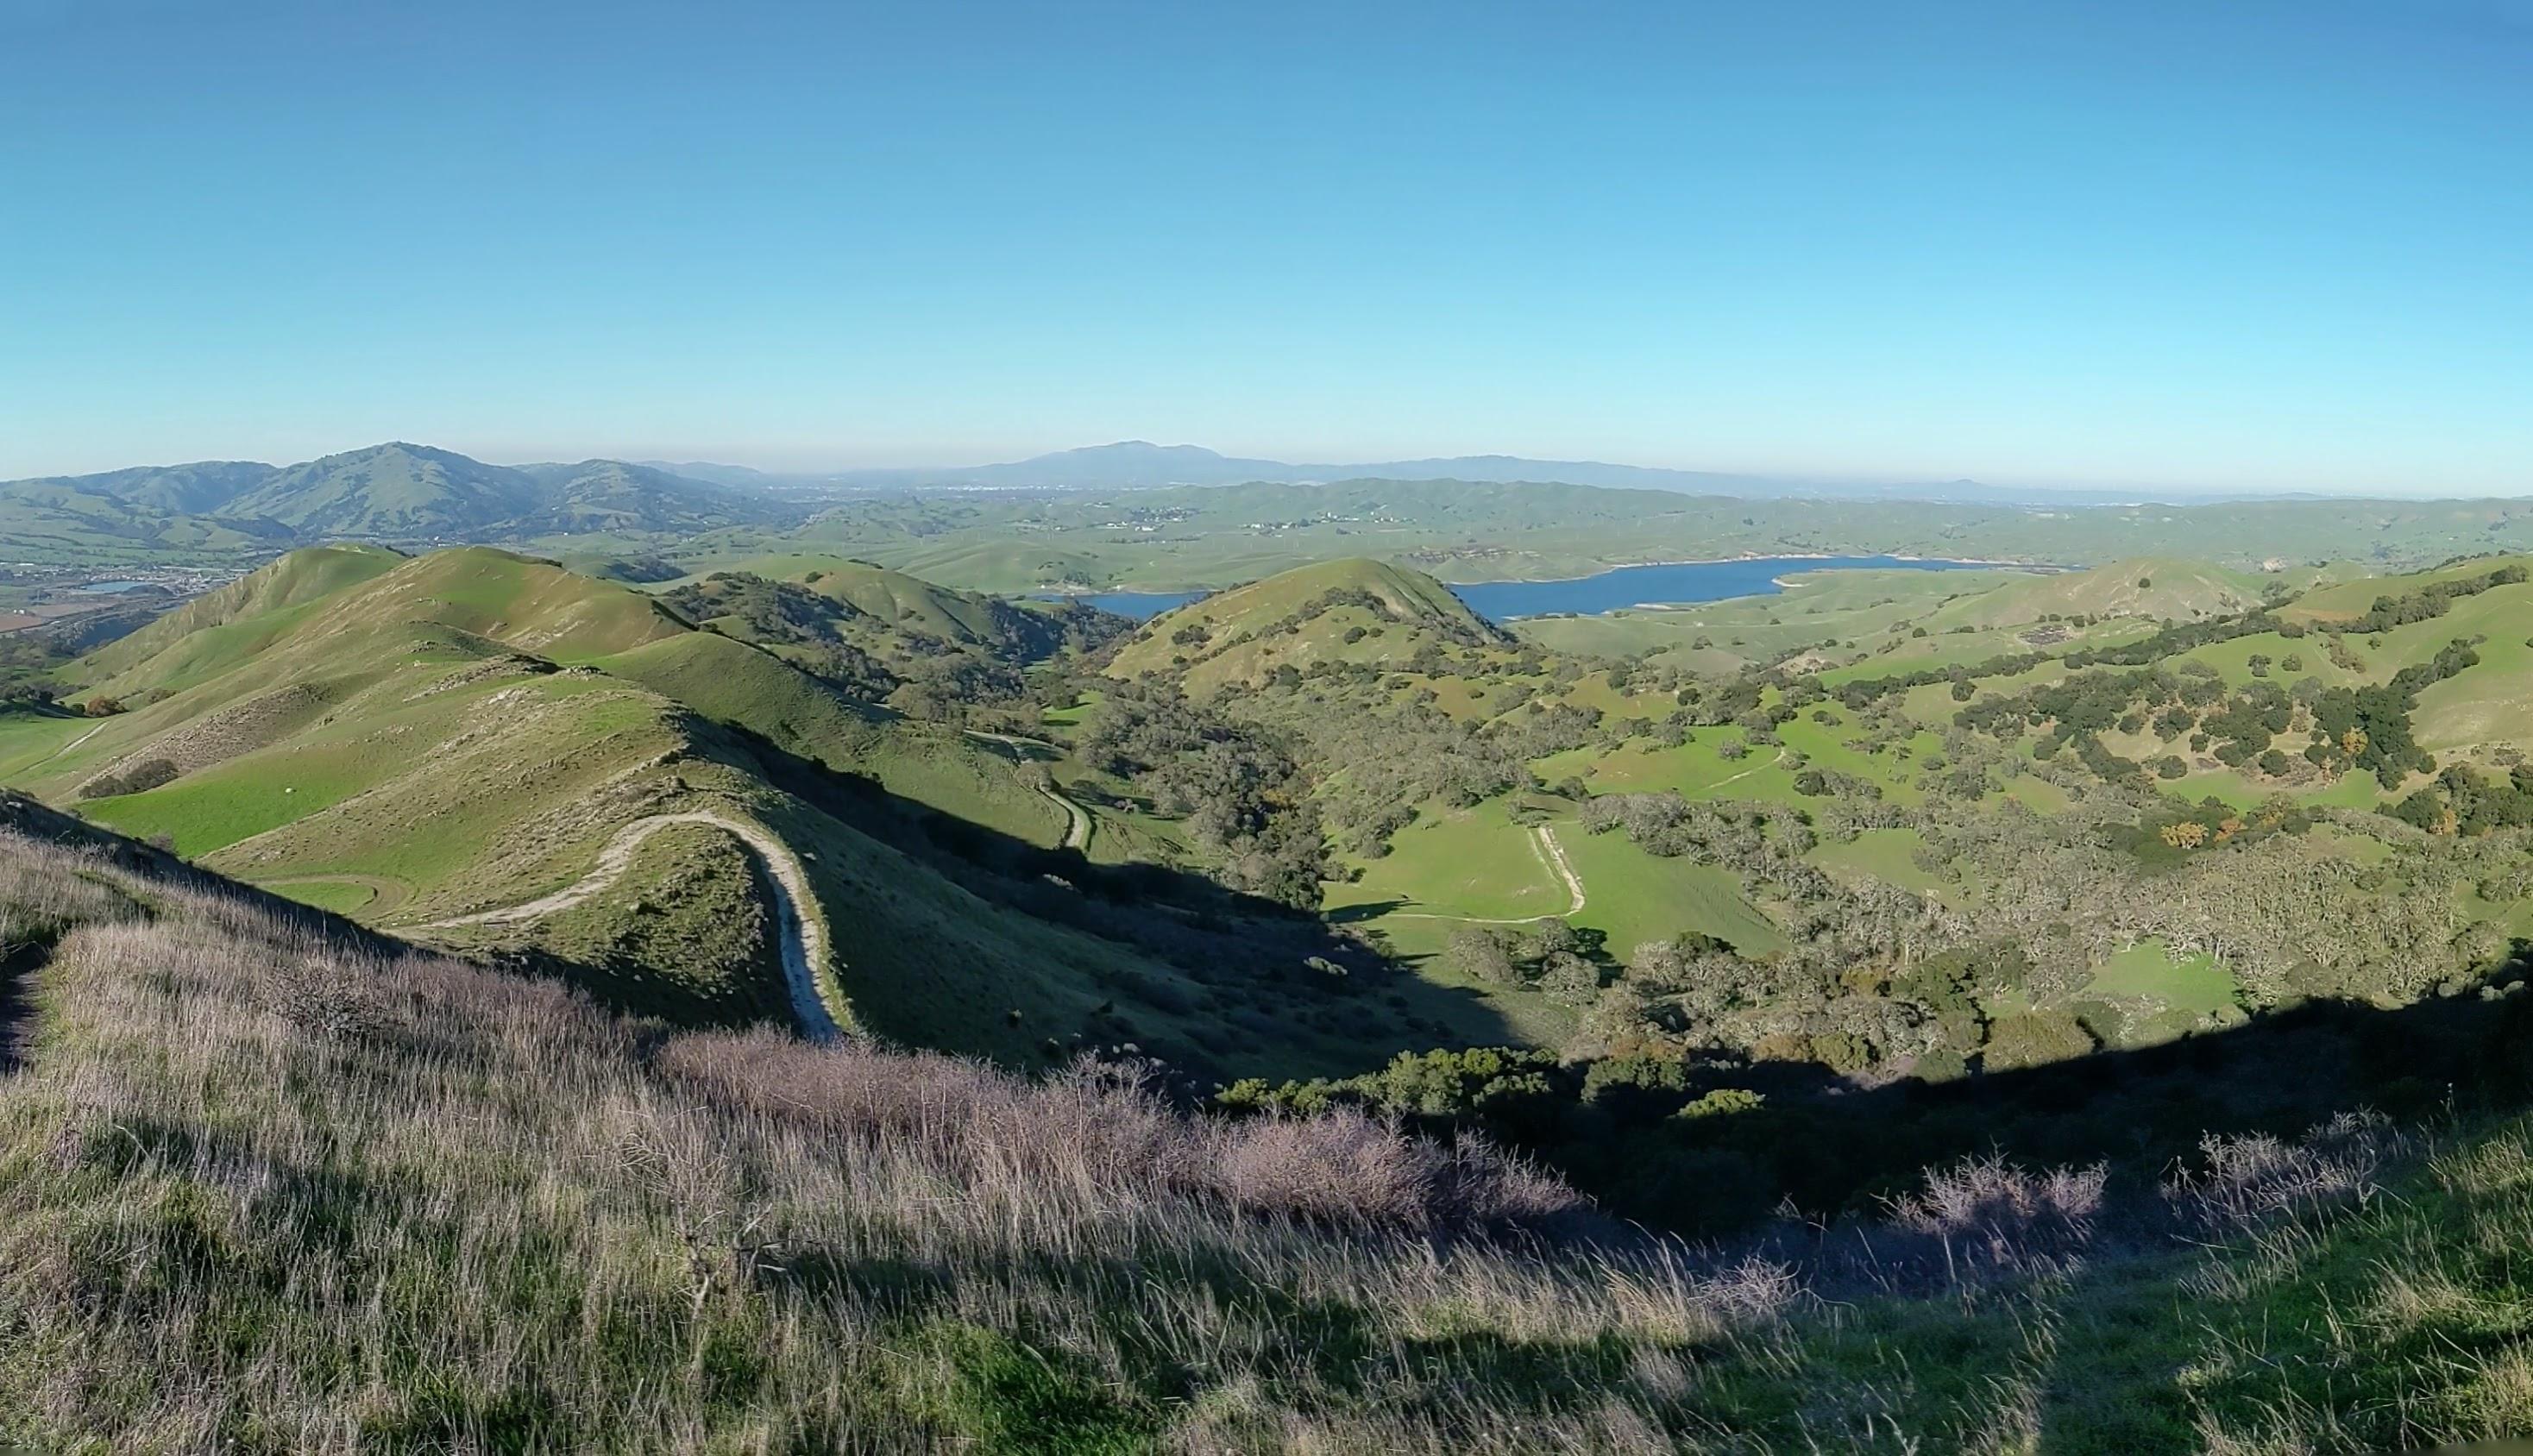 View from the summit toward San Antonio reservoir and Mt. Diablo